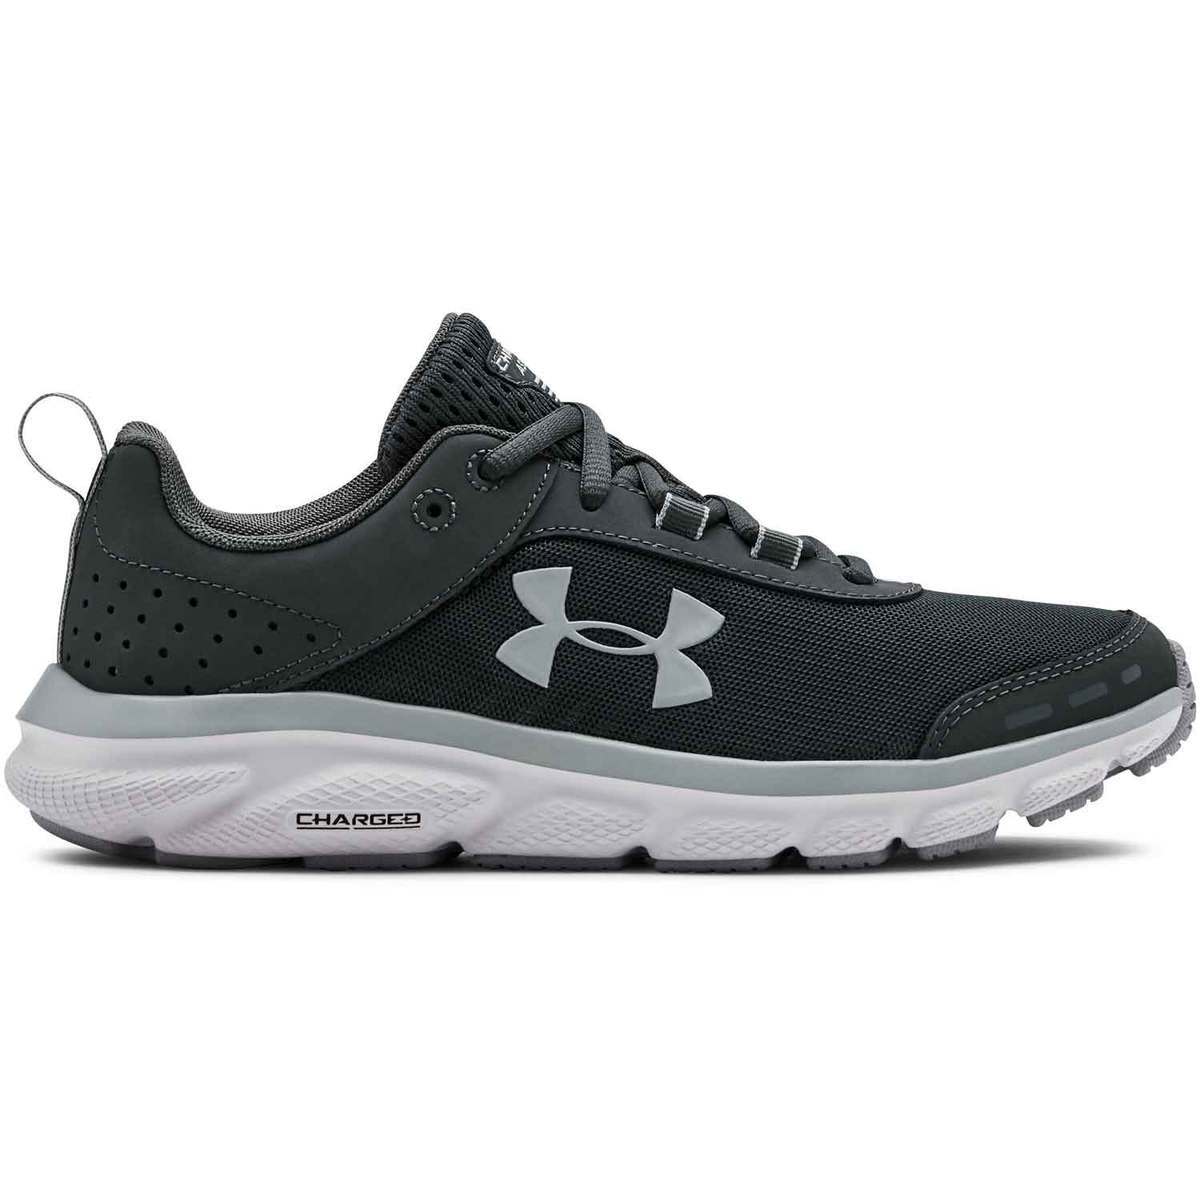 Under Armour Women's Charged Assert 8 Running Shoes - Pitch Gray - Size ...